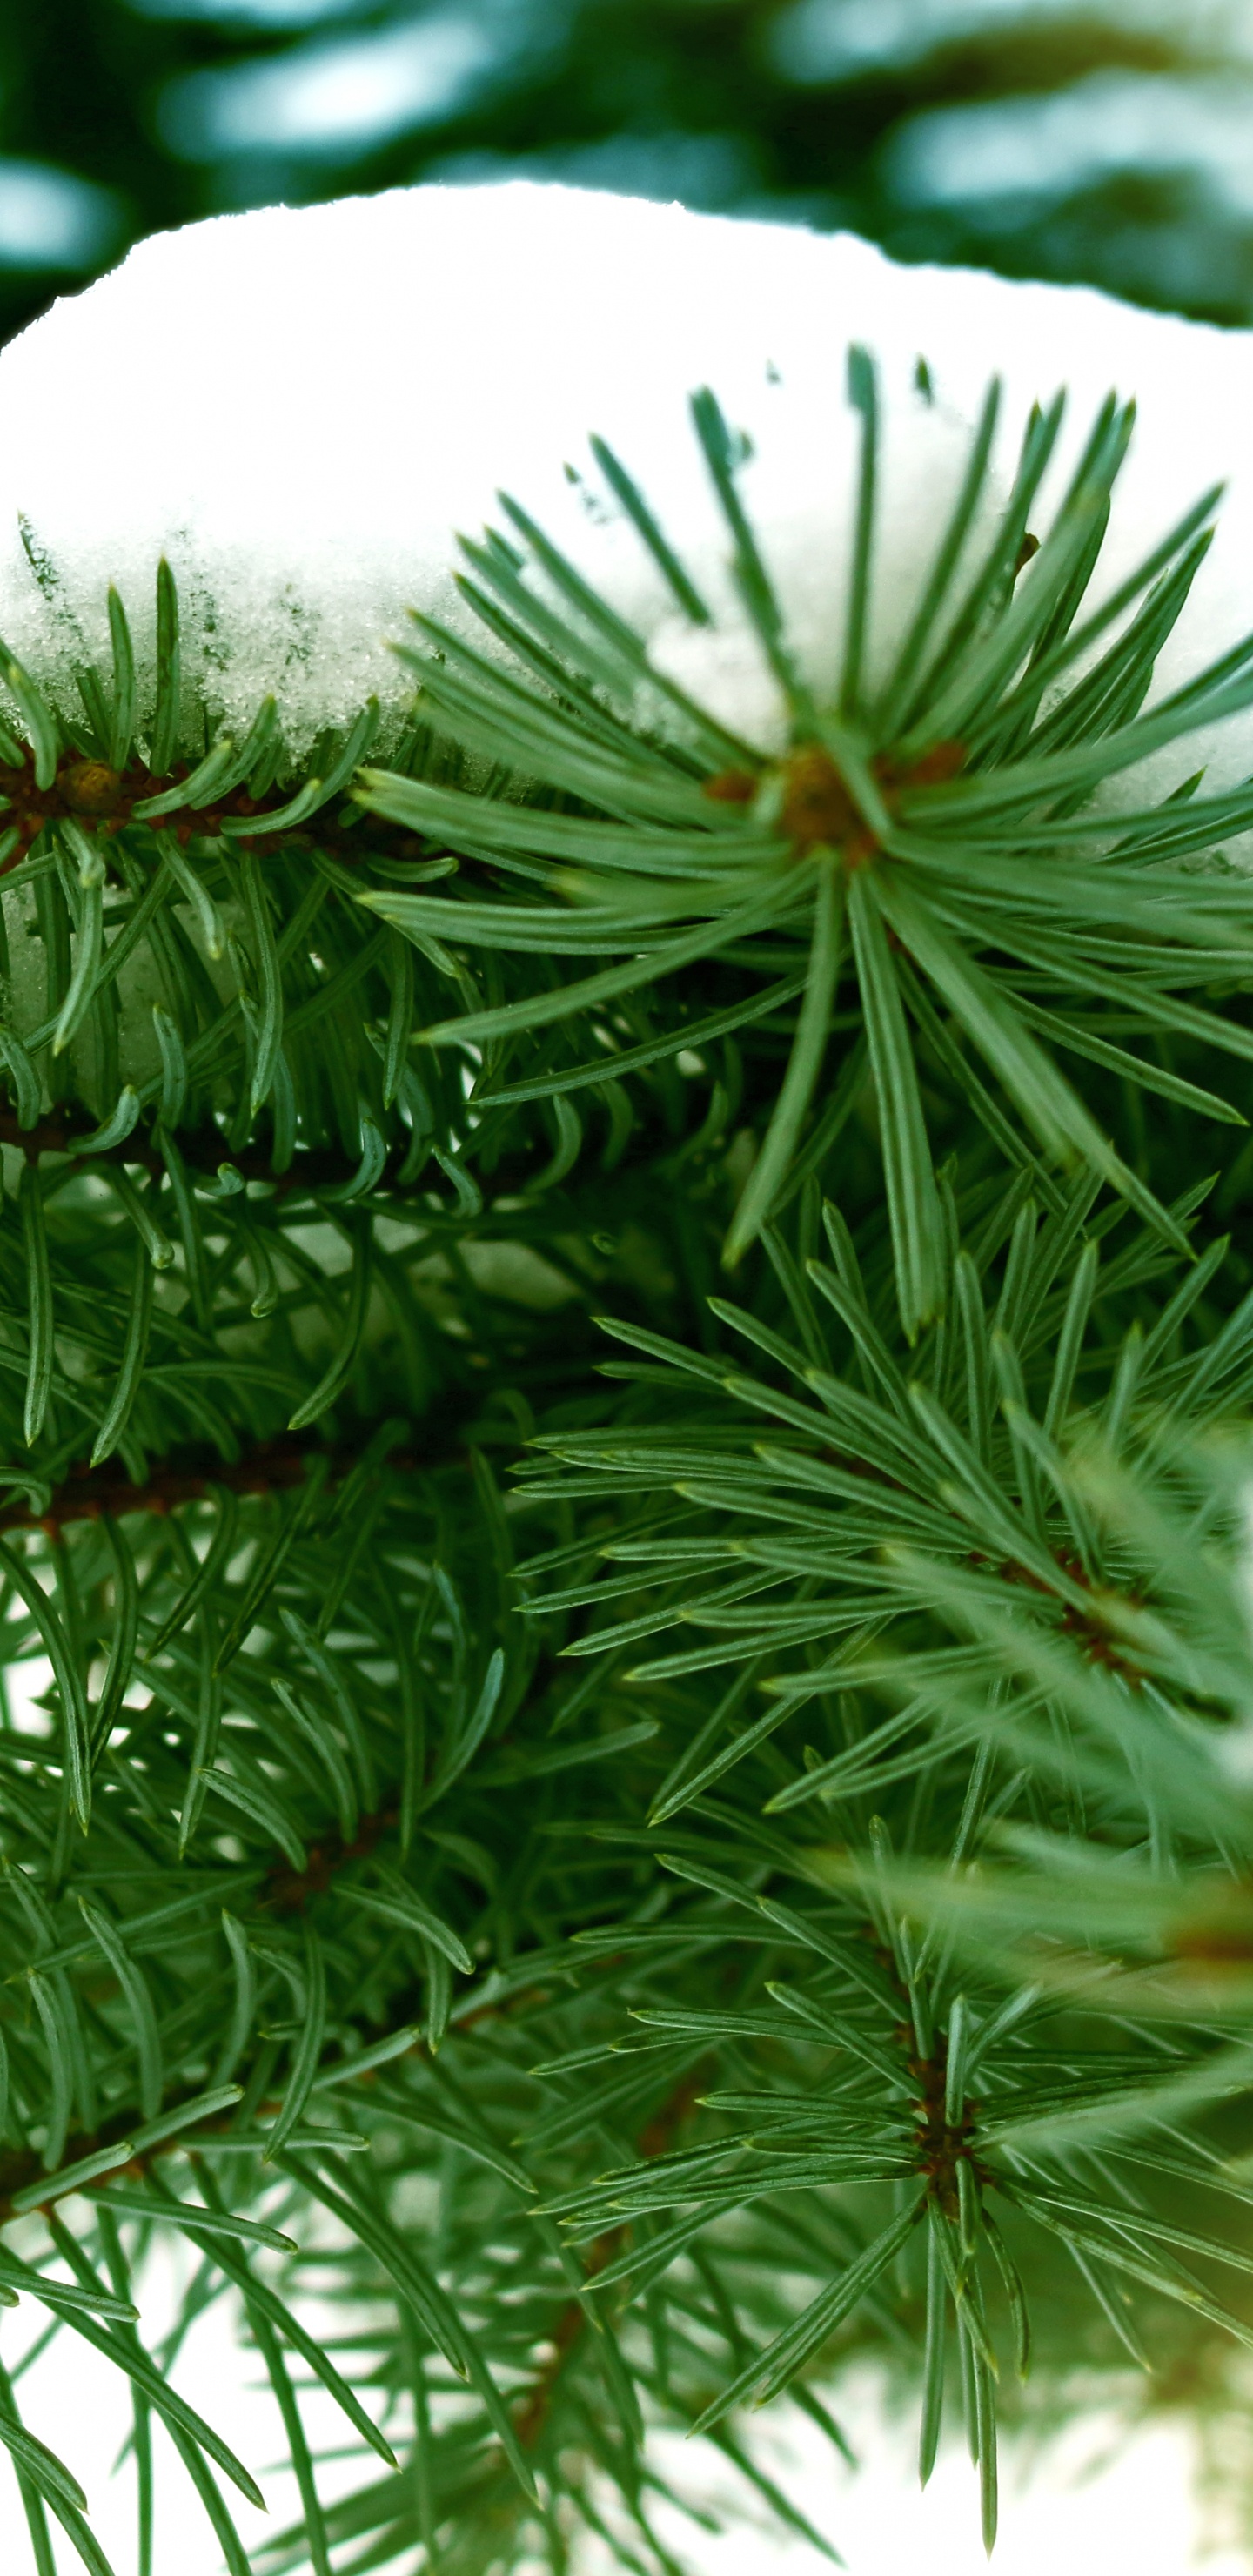 Green Pine Tree Covered With Snow. Wallpaper in 1440x2960 Resolution